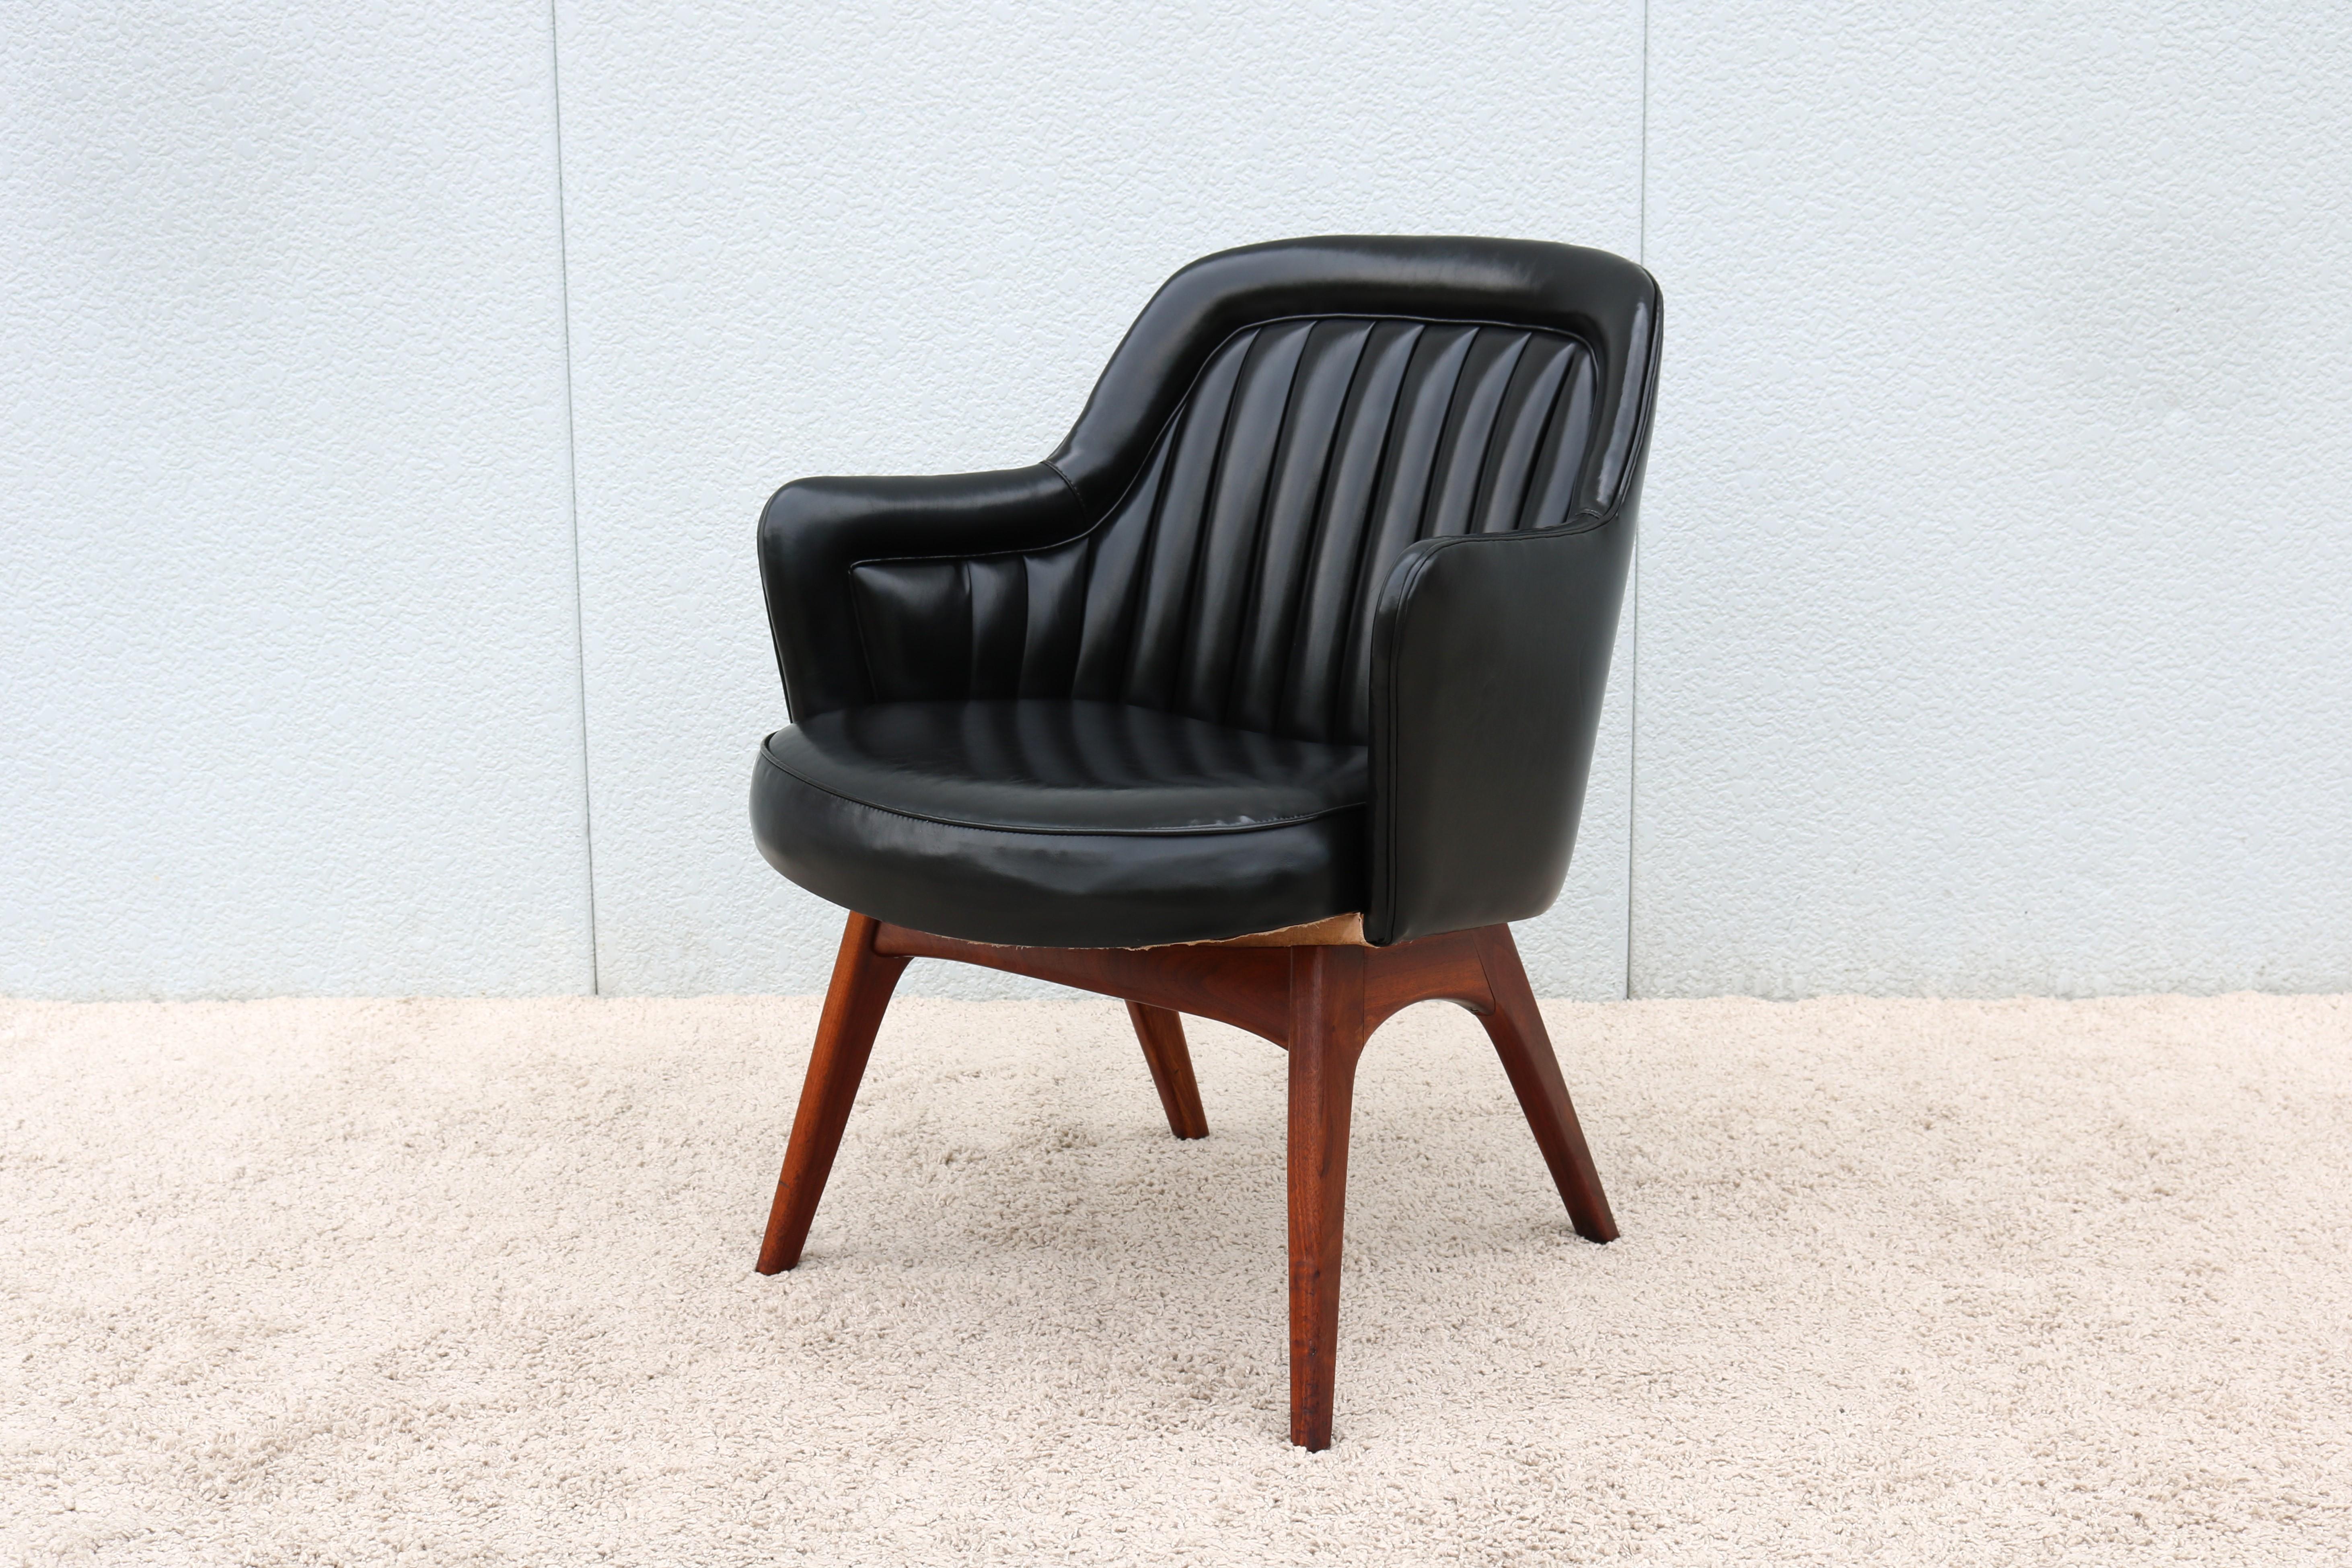 Fabulous vintage mid-century modern black Naugahyde and walnut base executive armchair, in the style of Eero Saarinen and Ward Bennett.
The classic and very comfortable design of mid-century modern make this chair an impressive addition to any